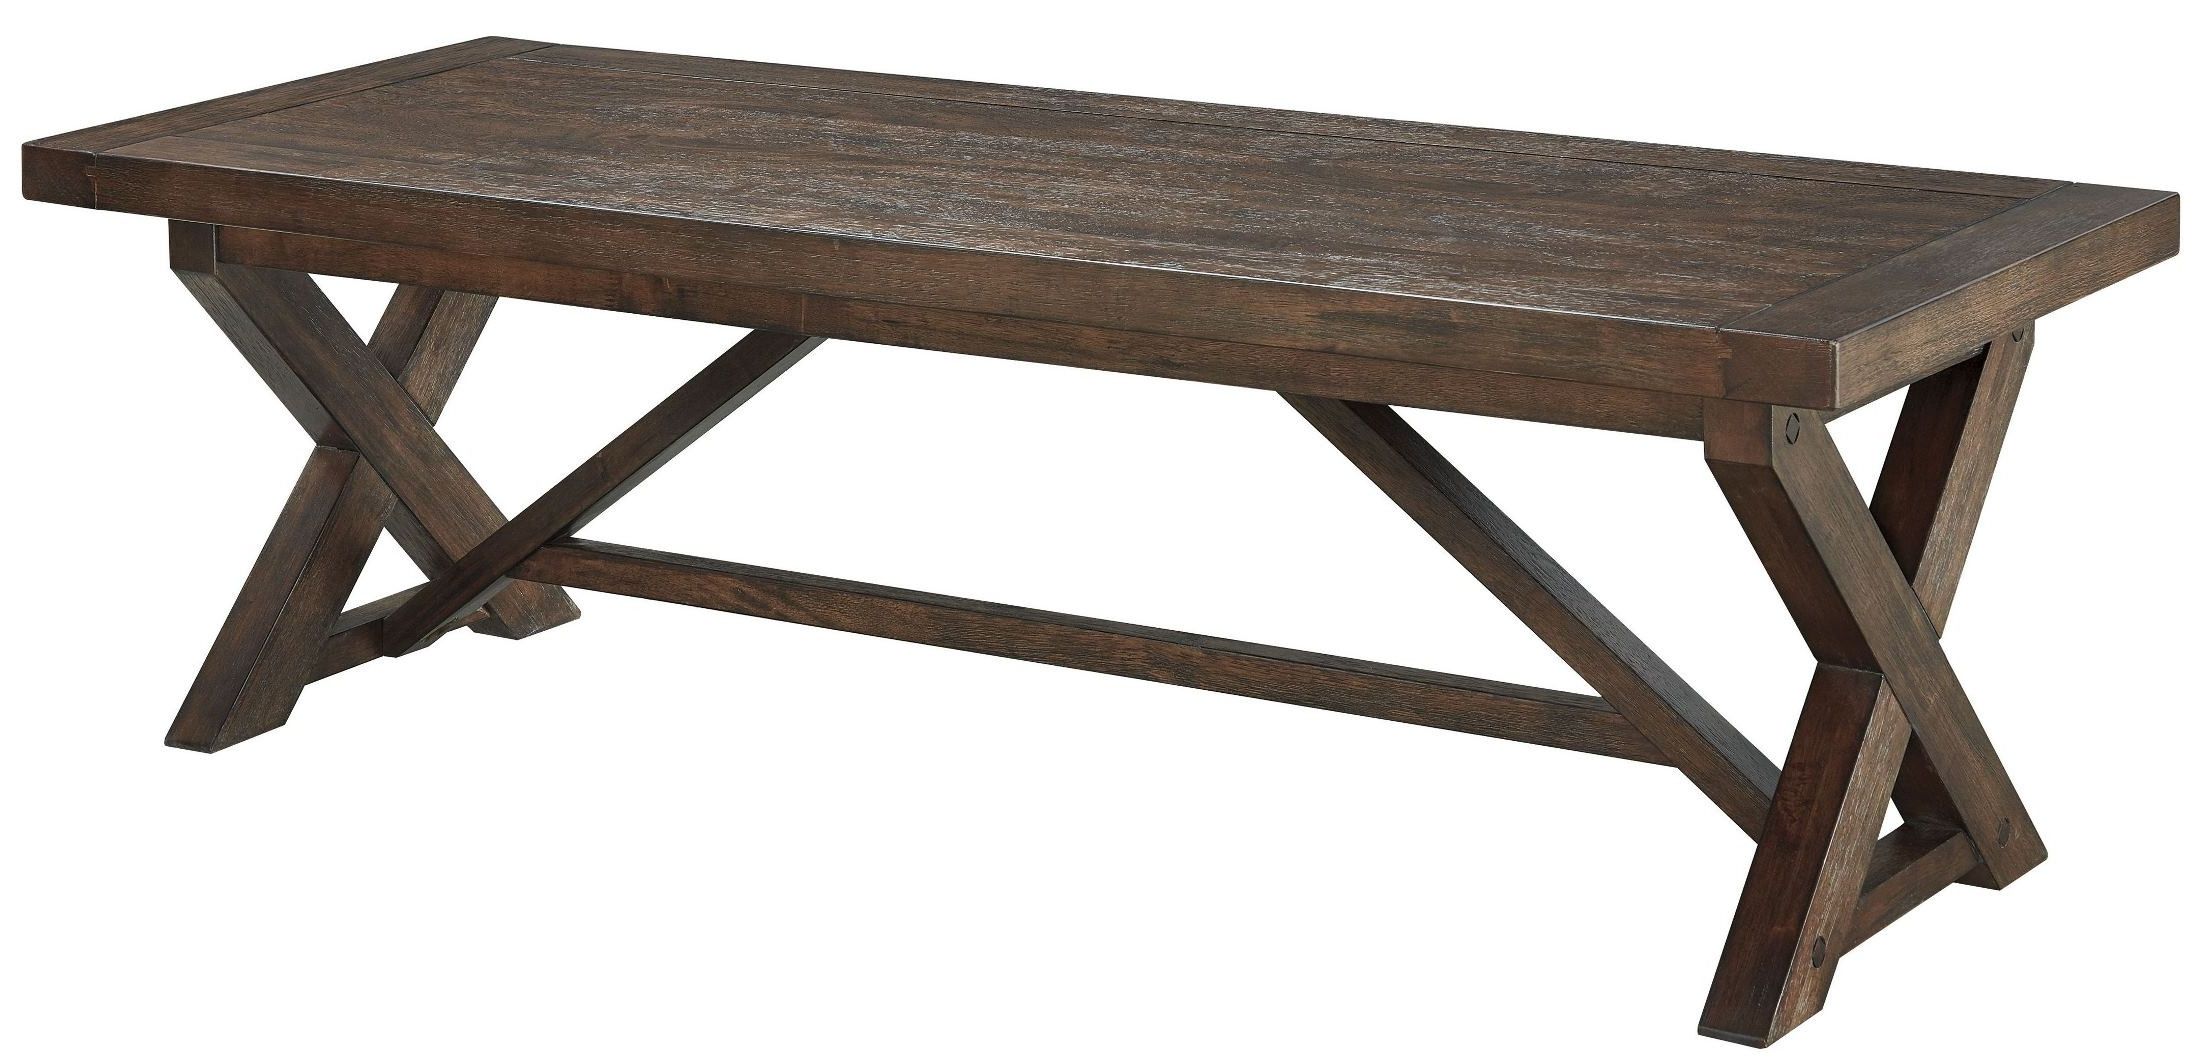 Windville Dark Brown Rectangular Cocktail Table From Inside 2019 Brown Cocktail Tables (View 10 of 20)